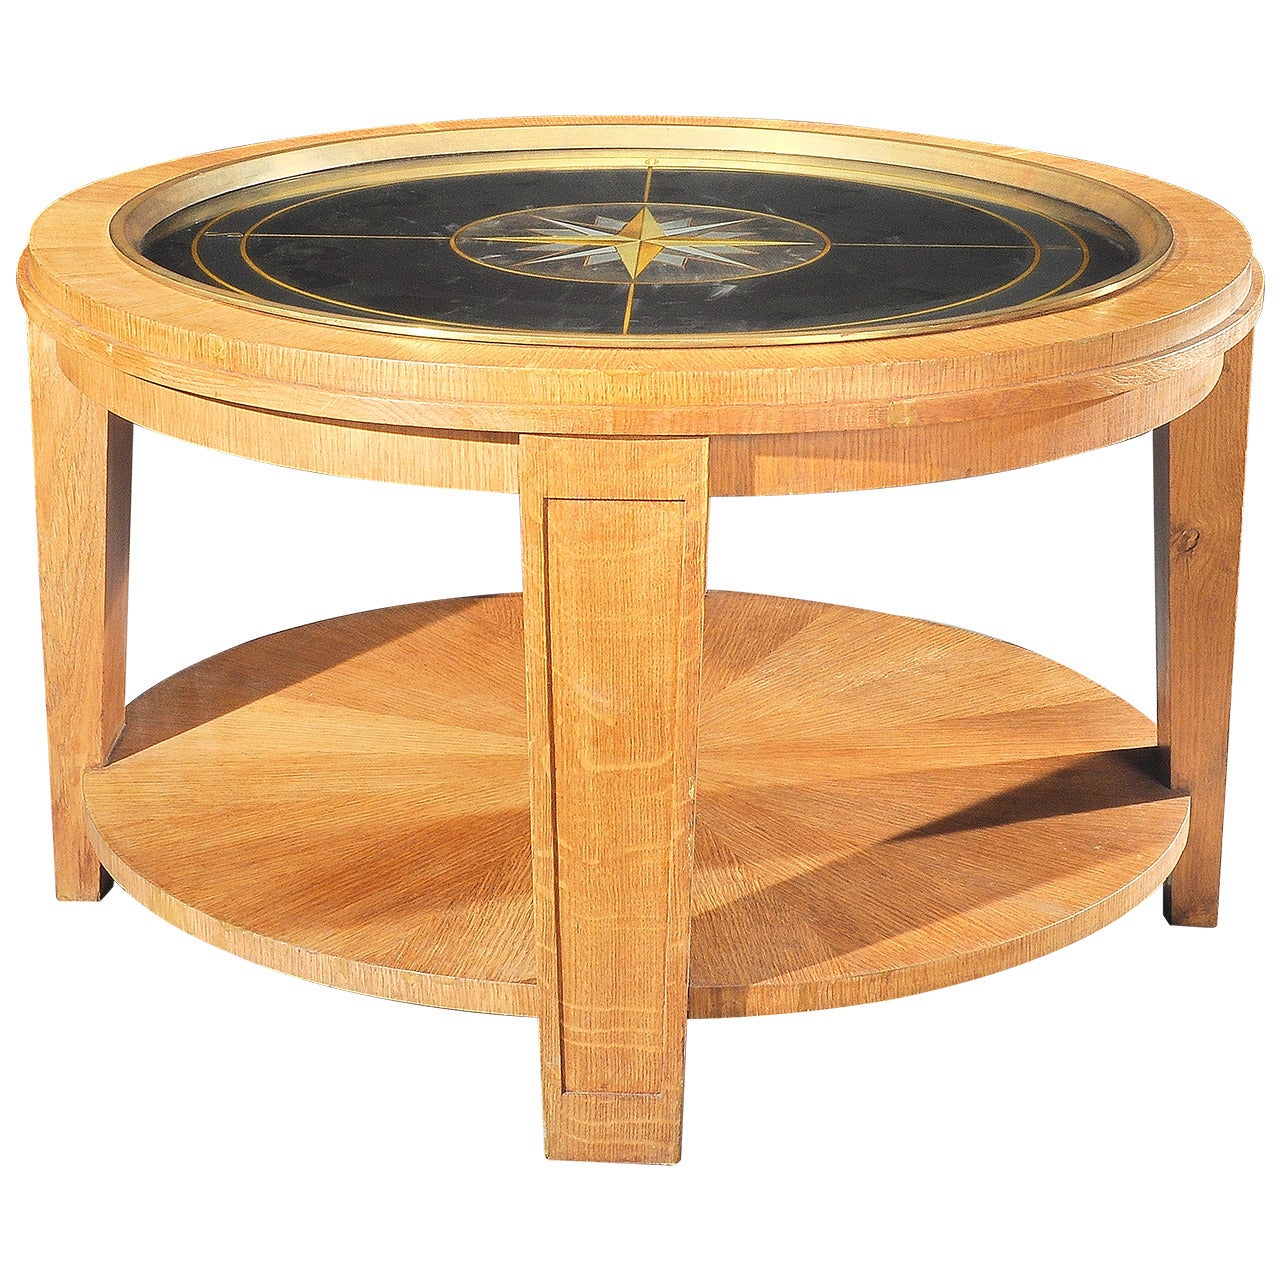 Important Pedestal Table Attributed to Jacques Adnet For Sale